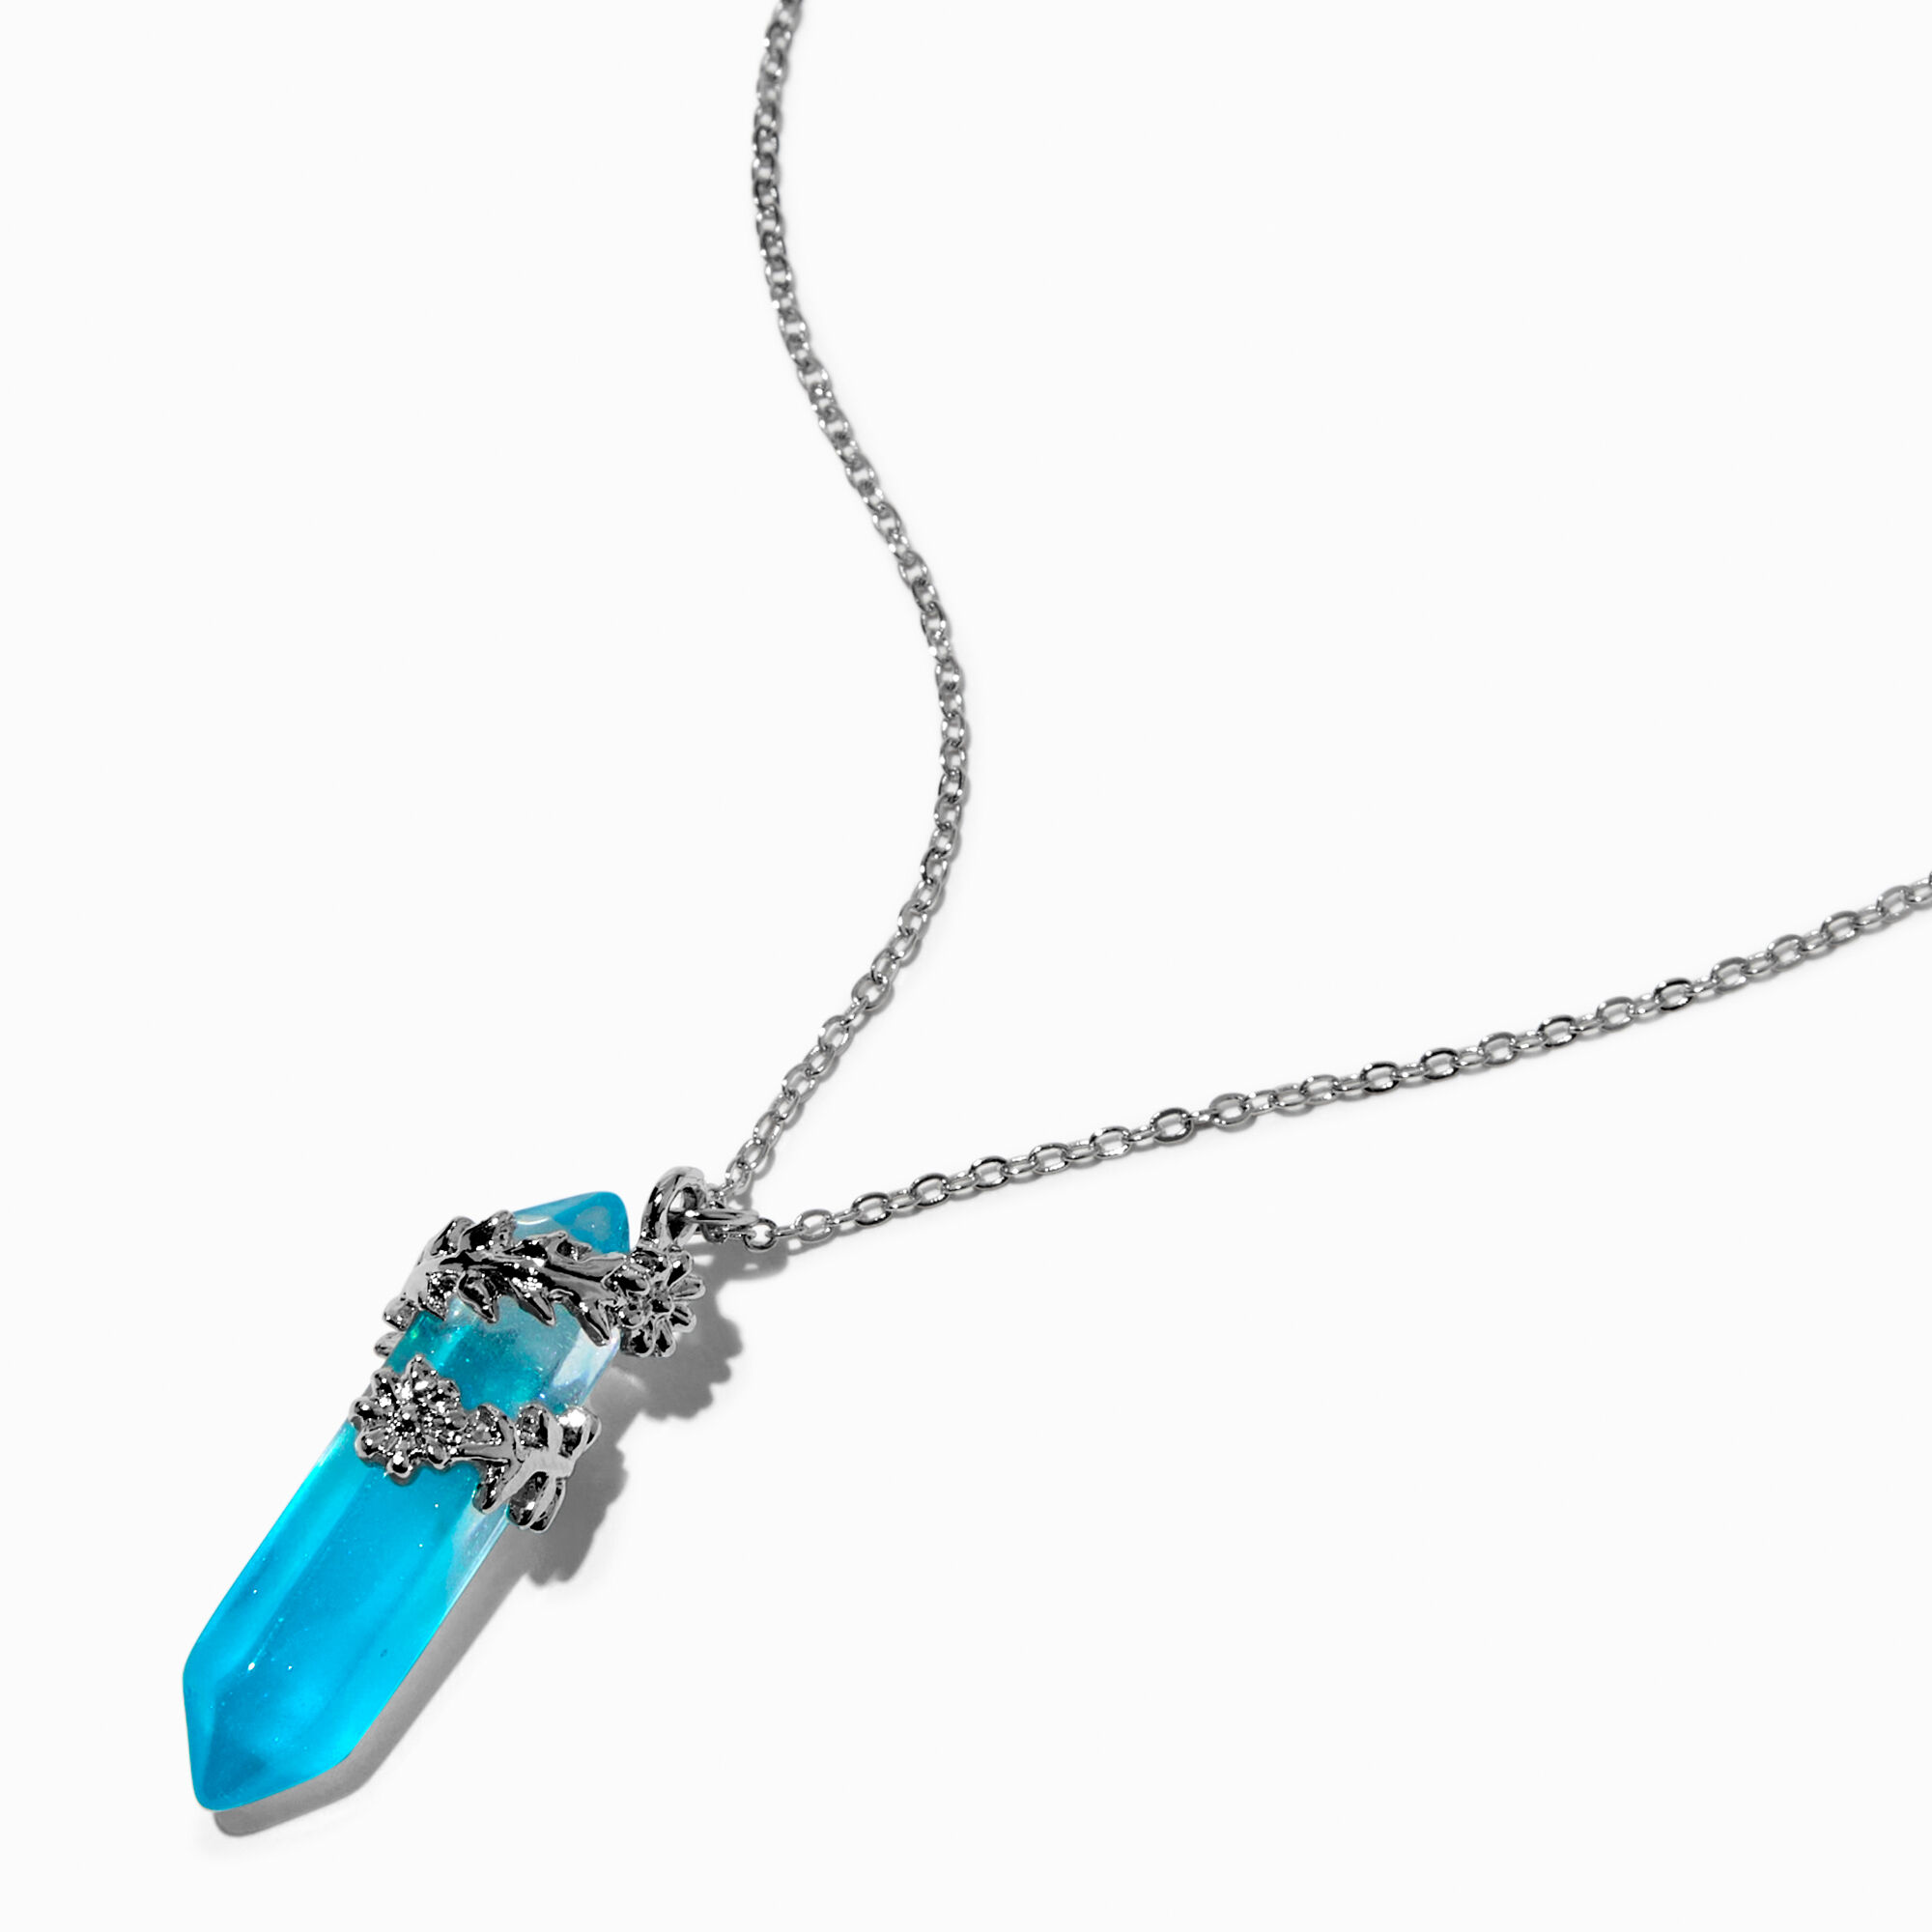 View Claires FlowerWrapped Glow In The Dark Mystical Gem Pendant Necklace Blue information